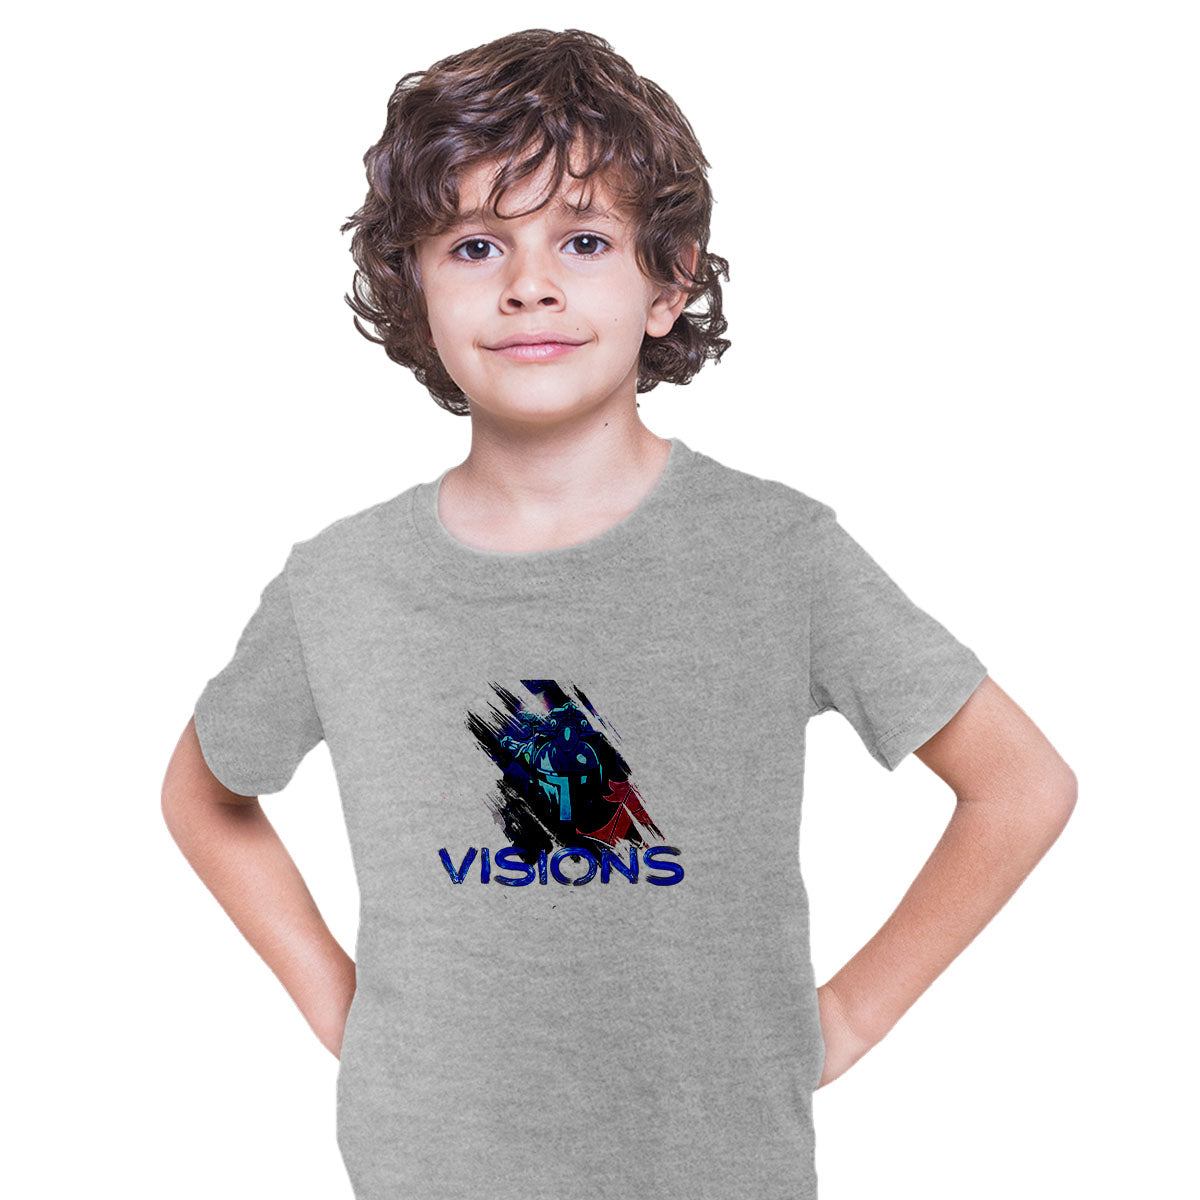 Troopers Star Wars Vision Inspired T-shirt for Kids - Kuzi Tees